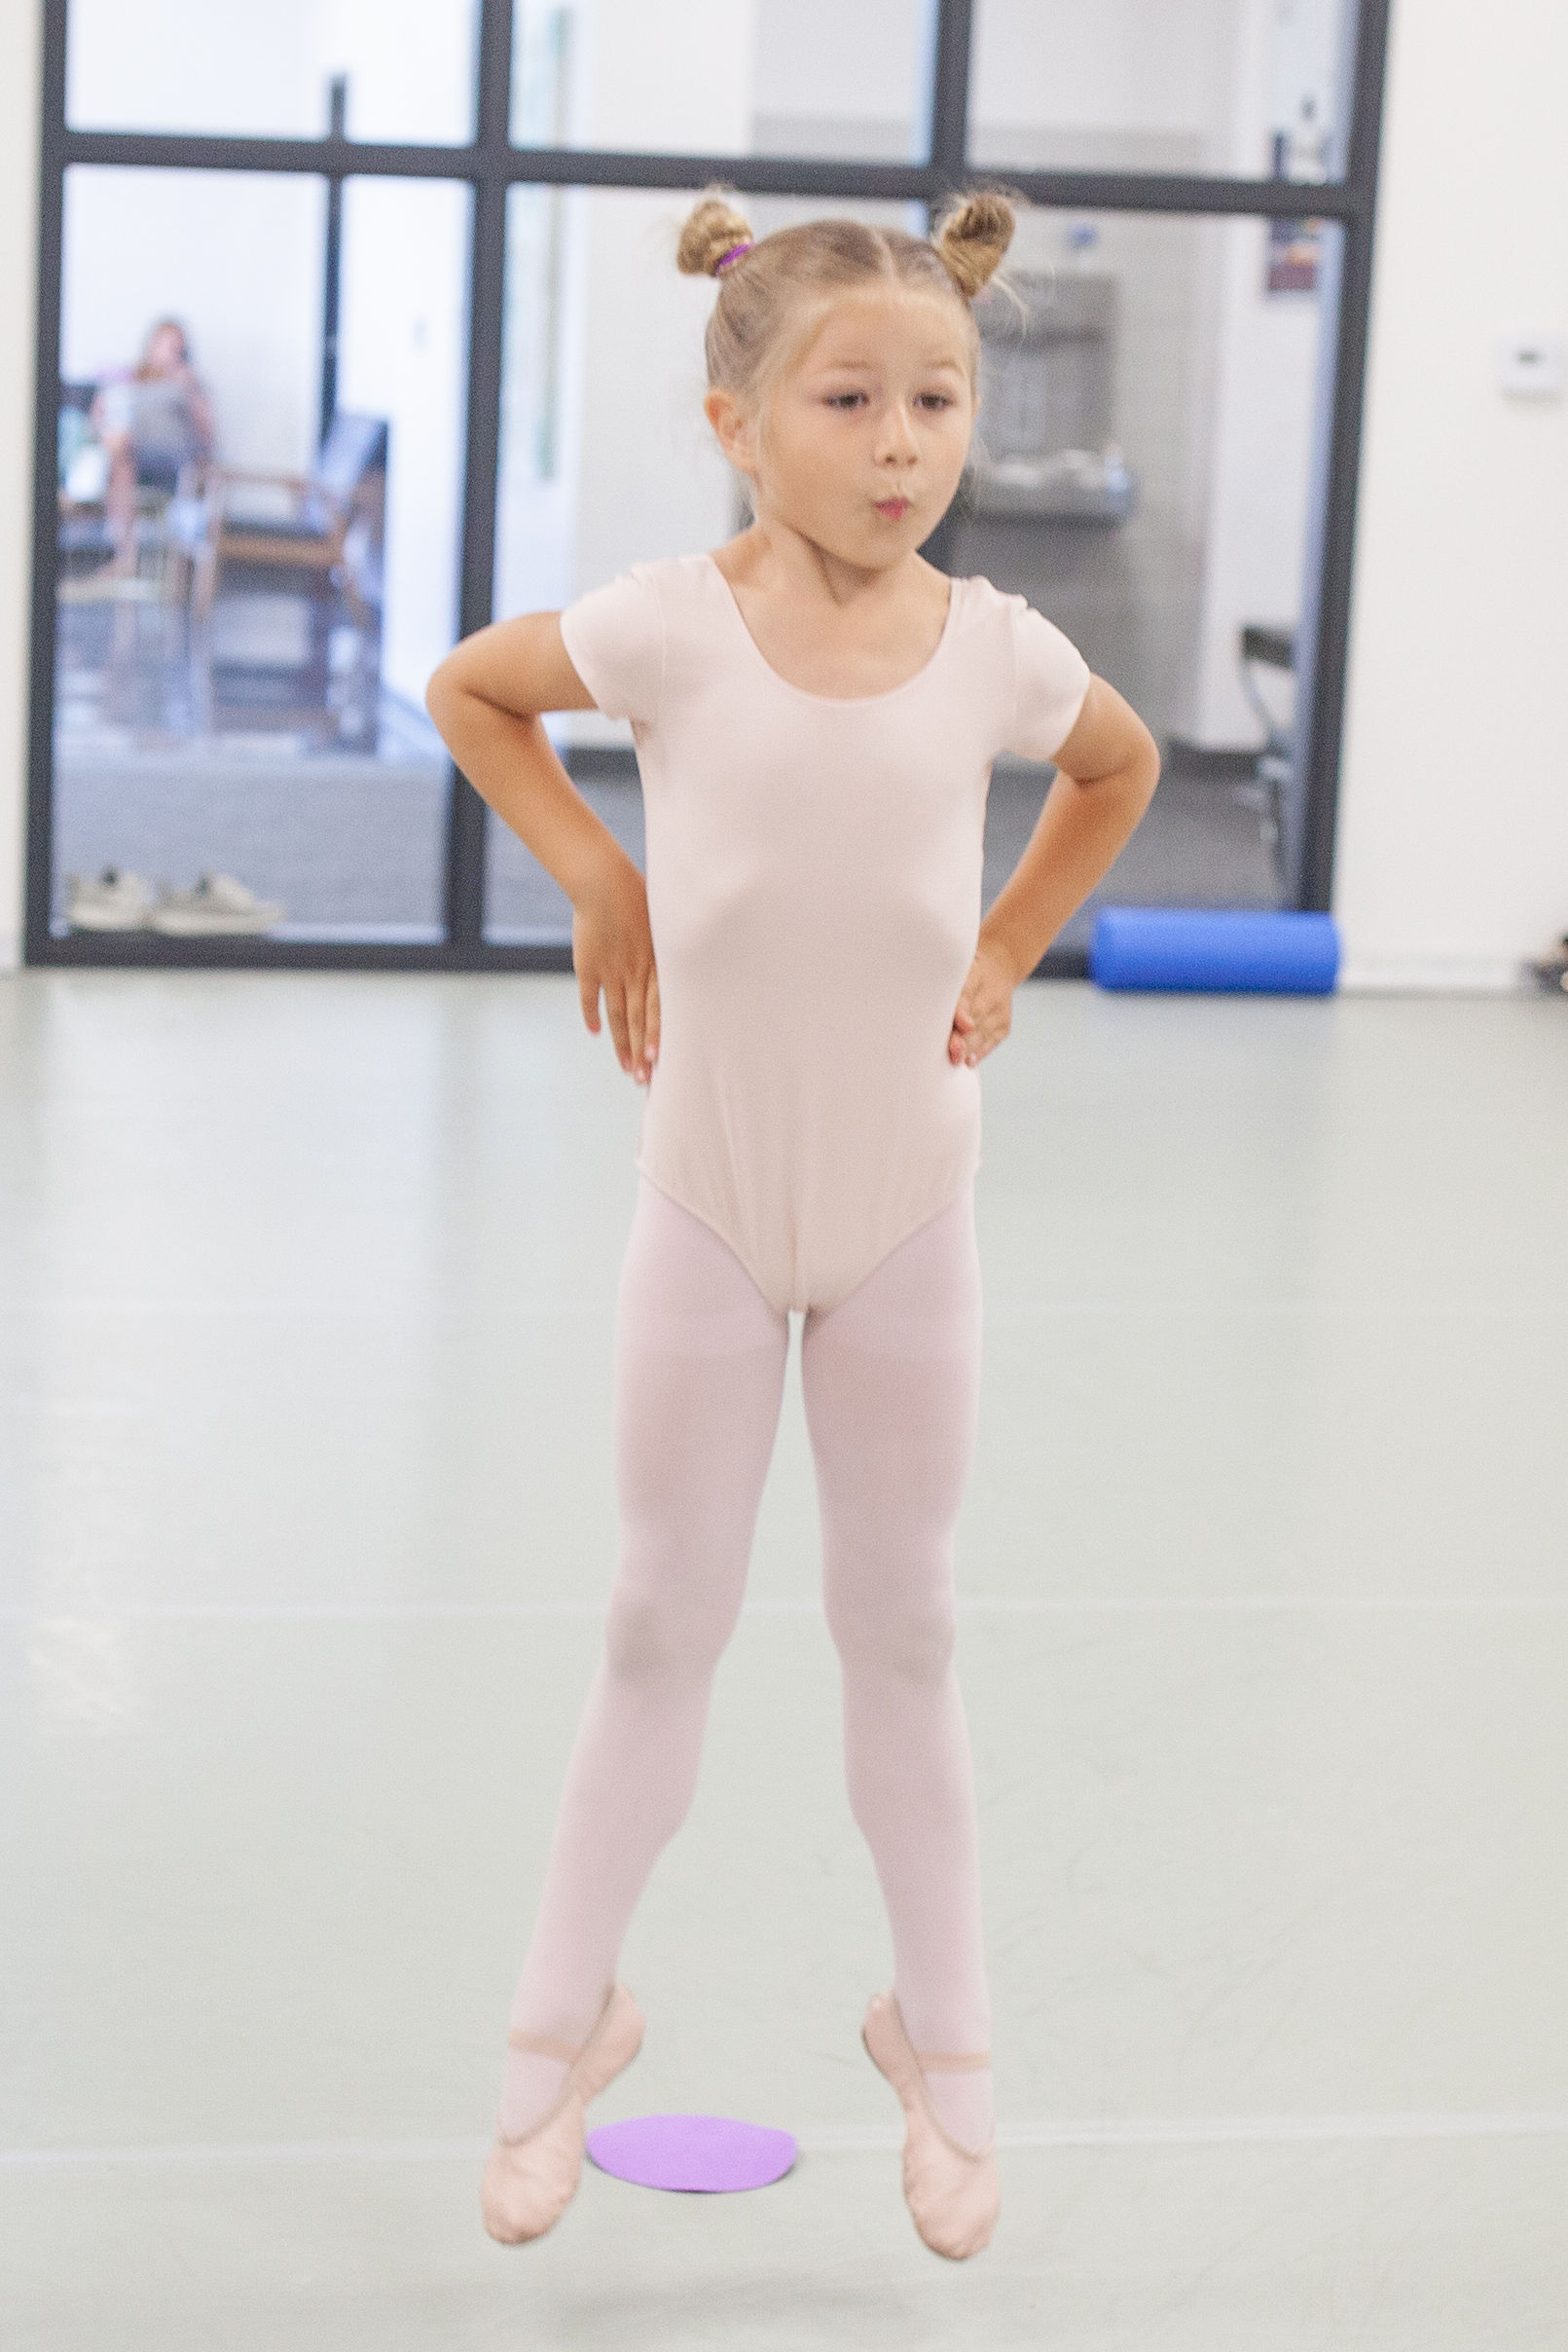 Preschool young child in ballet class in Utah jumping in front of dot